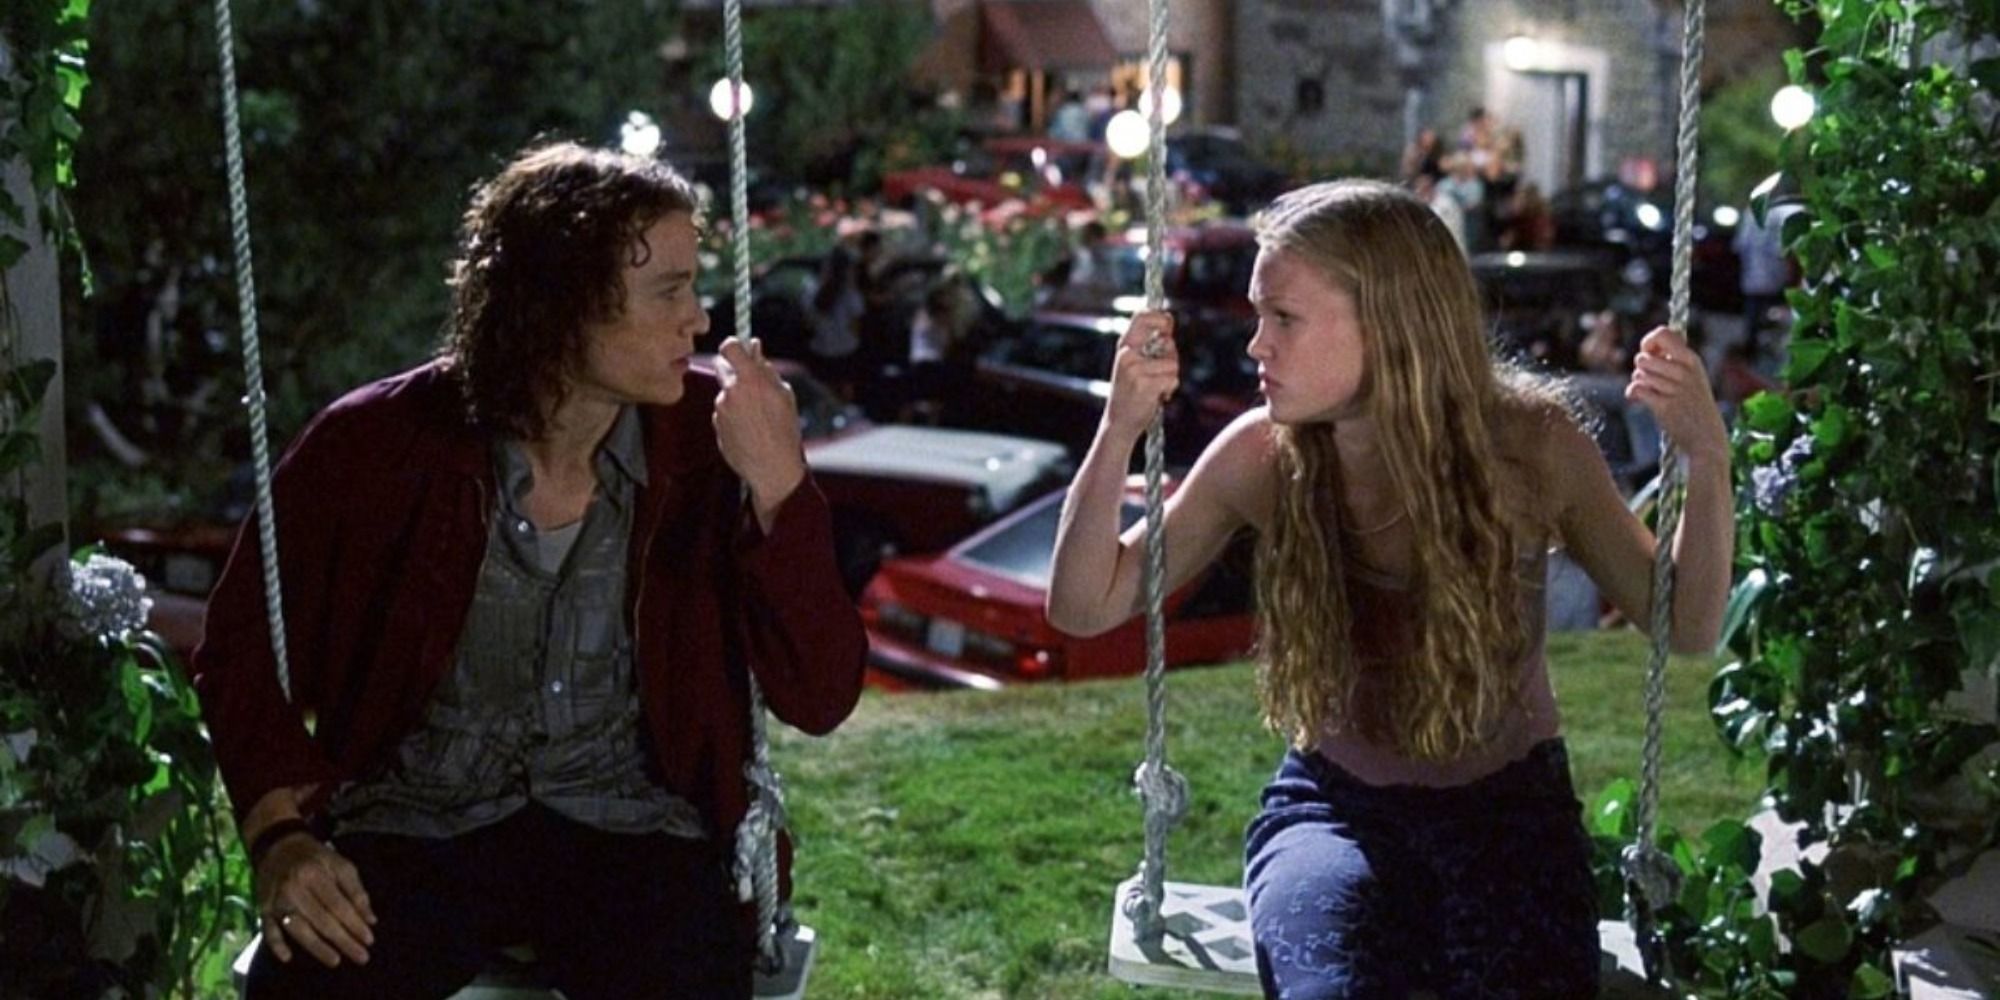 Heath Ledger and Julia Stiles as Patrick and Kat talking on the swings in 10 Things I Hate About You.